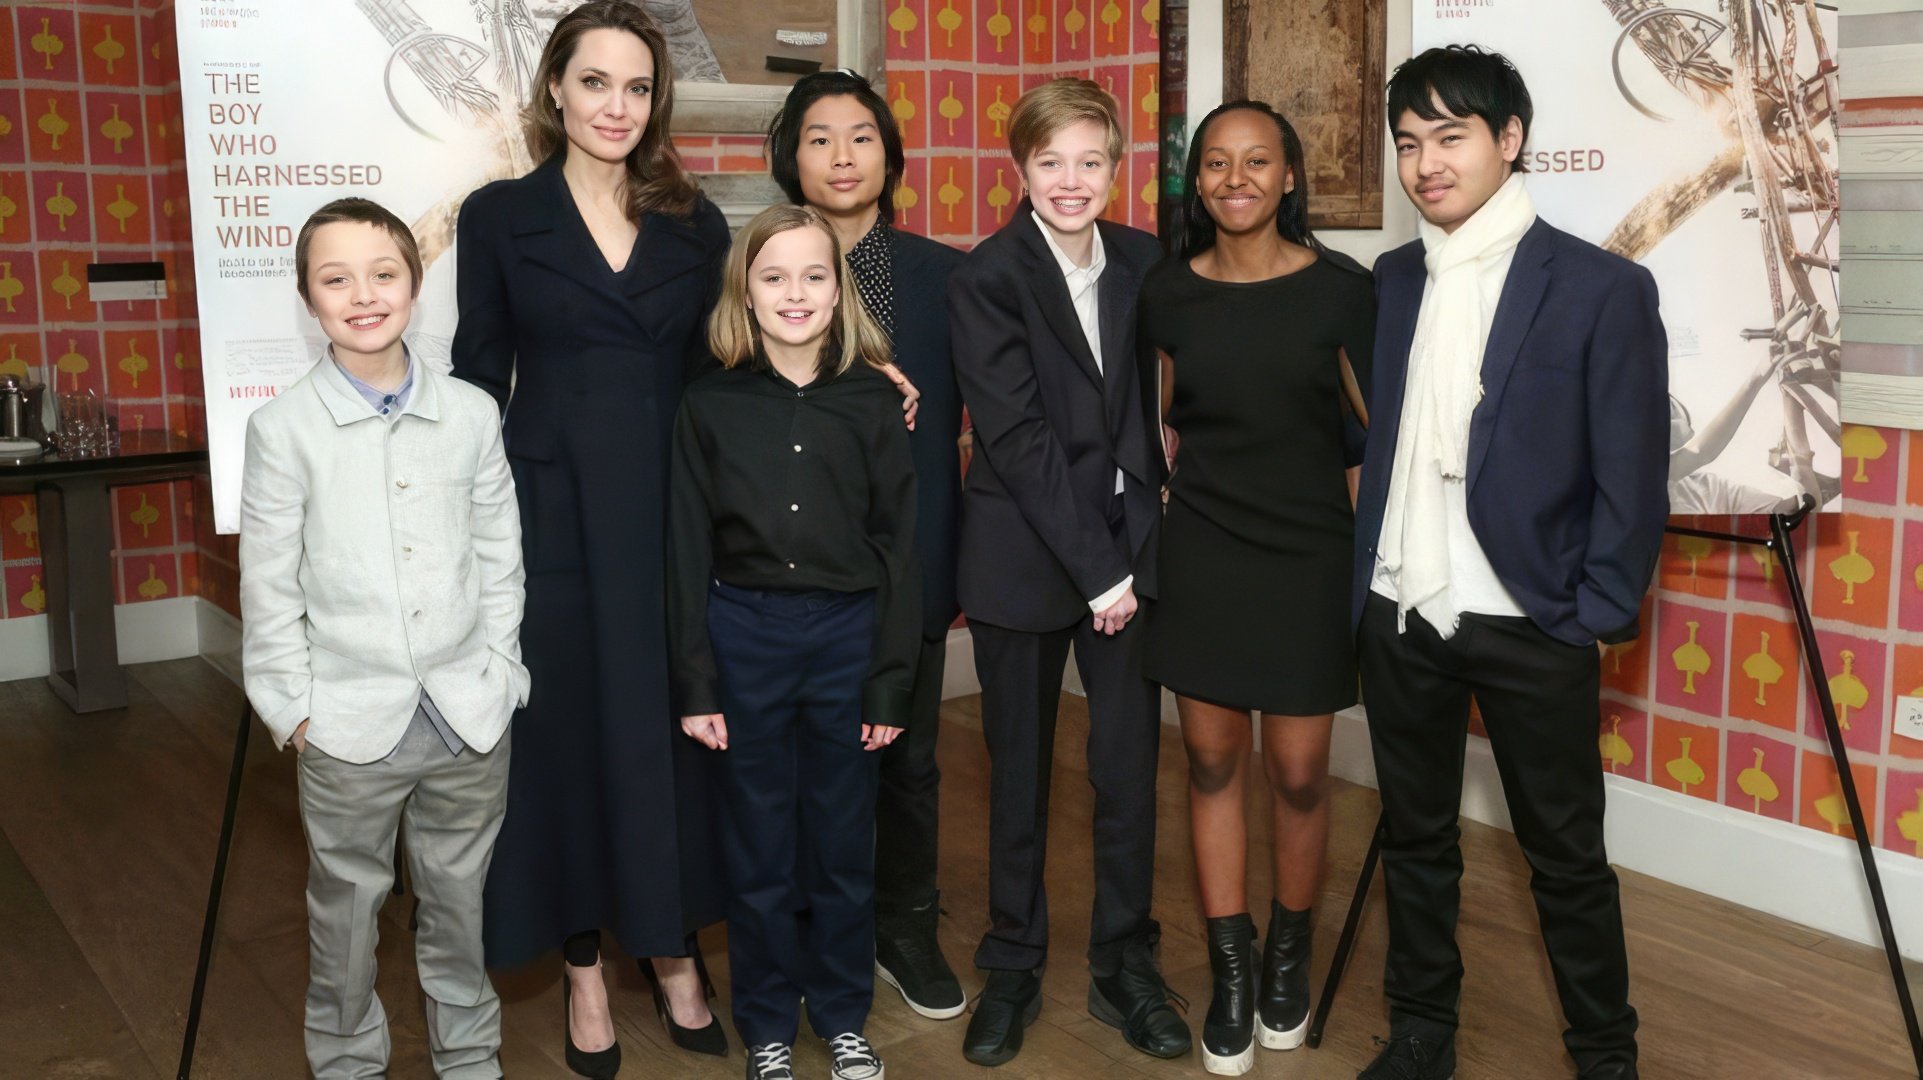 All of Angelina Jolie's children: 3 adopted and 3 biological